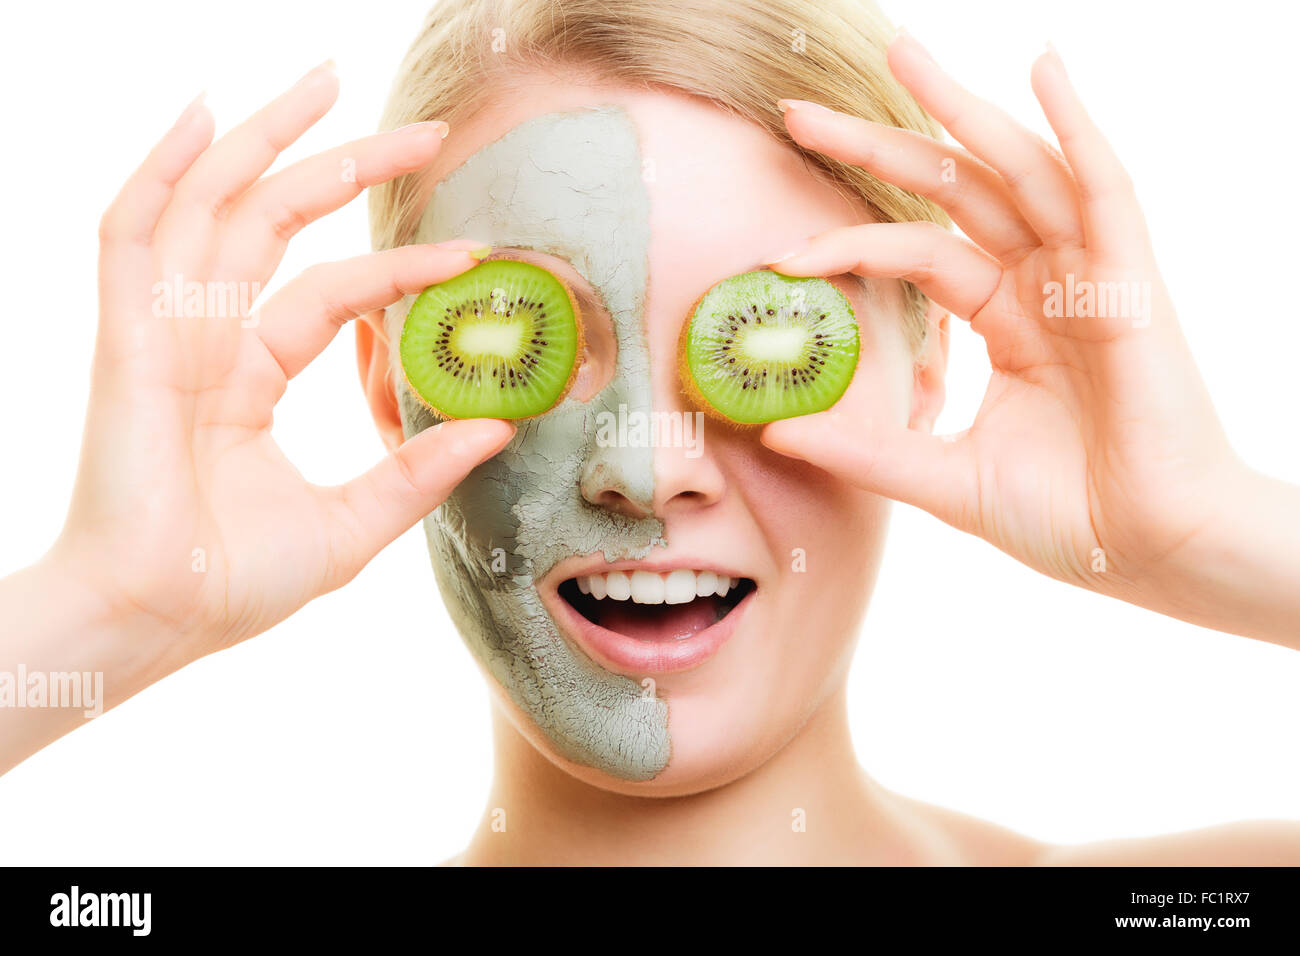 Skin care. Woman in clay mask with kiwi on face Stock Photo